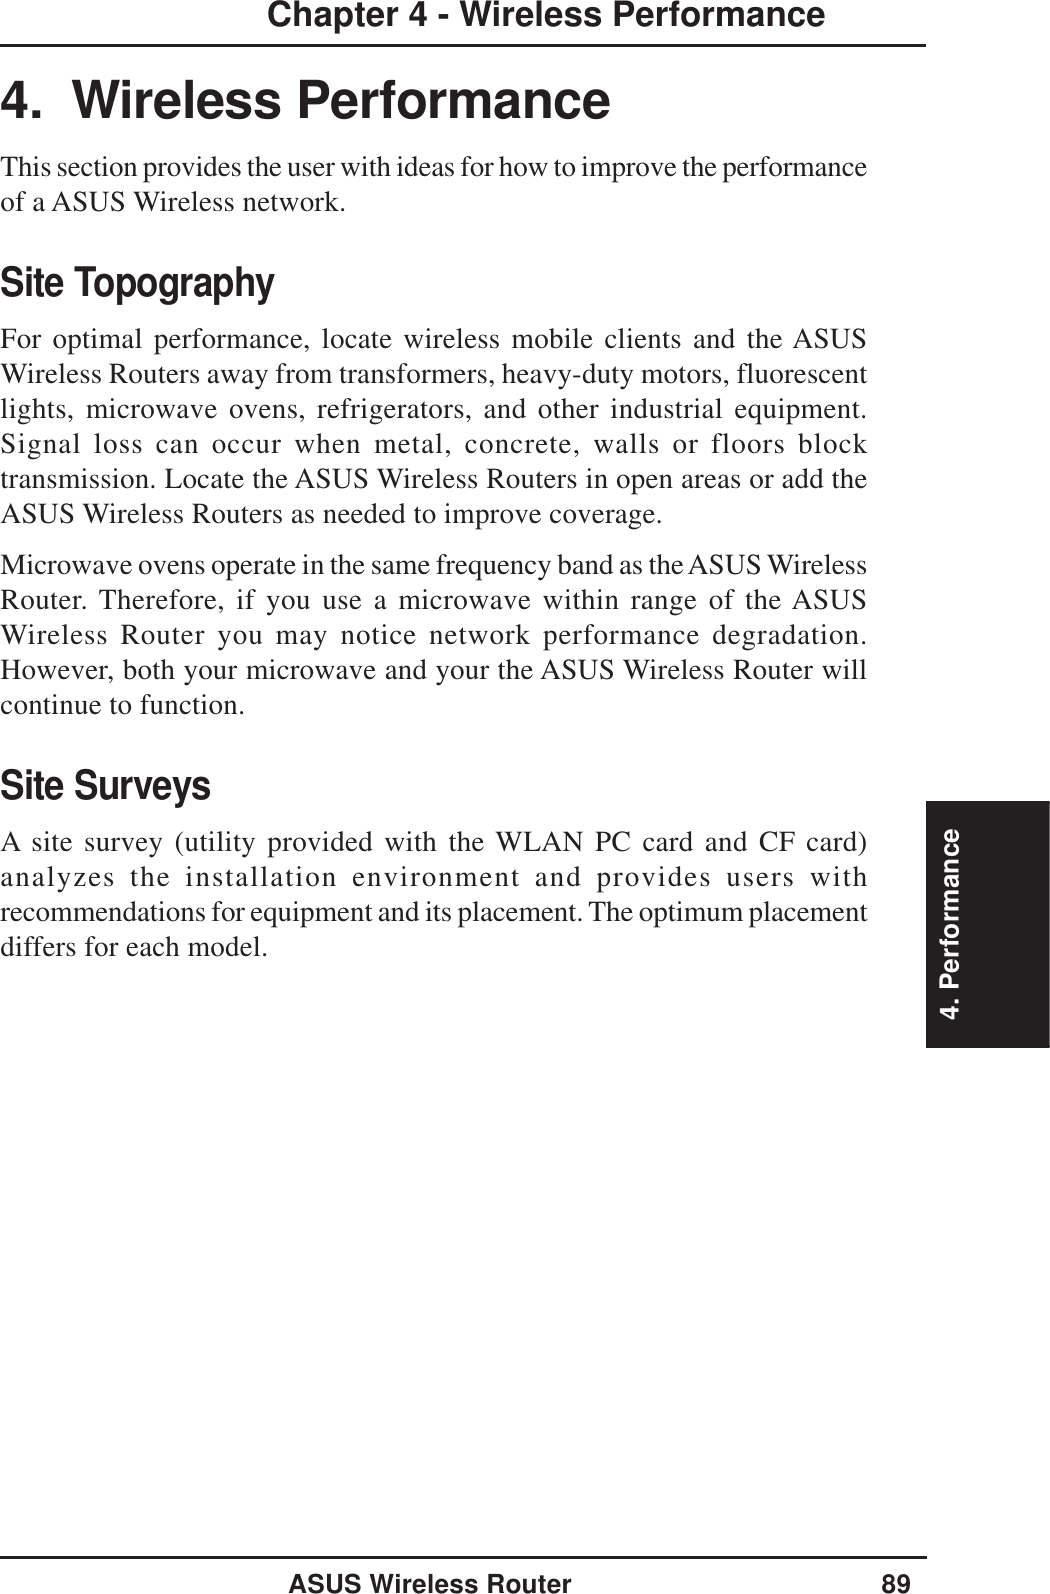 4. PerformanceASUS Wireless Router 89Chapter 4 - Wireless Performance4.  Wireless PerformanceThis section provides the user with ideas for how to improve the performanceof a ASUS Wireless network.Site TopographyFor optimal performance, locate wireless mobile clients and the ASUSWireless Routers away from transformers, heavy-duty motors, fluorescentlights, microwave ovens, refrigerators, and other industrial equipment.Signal loss can occur when metal, concrete, walls or floors blocktransmission. Locate the ASUS Wireless Routers in open areas or add theASUS Wireless Routers as needed to improve coverage.Microwave ovens operate in the same frequency band as the ASUS WirelessRouter. Therefore, if you use a microwave within range of the ASUSWireless Router you may notice network performance degradation.However, both your microwave and your the ASUS Wireless Router willcontinue to function.Site SurveysA site survey (utility provided with the WLAN PC card and CF card)analyzes the installation environment and provides users withrecommendations for equipment and its placement. The optimum placementdiffers for each model.